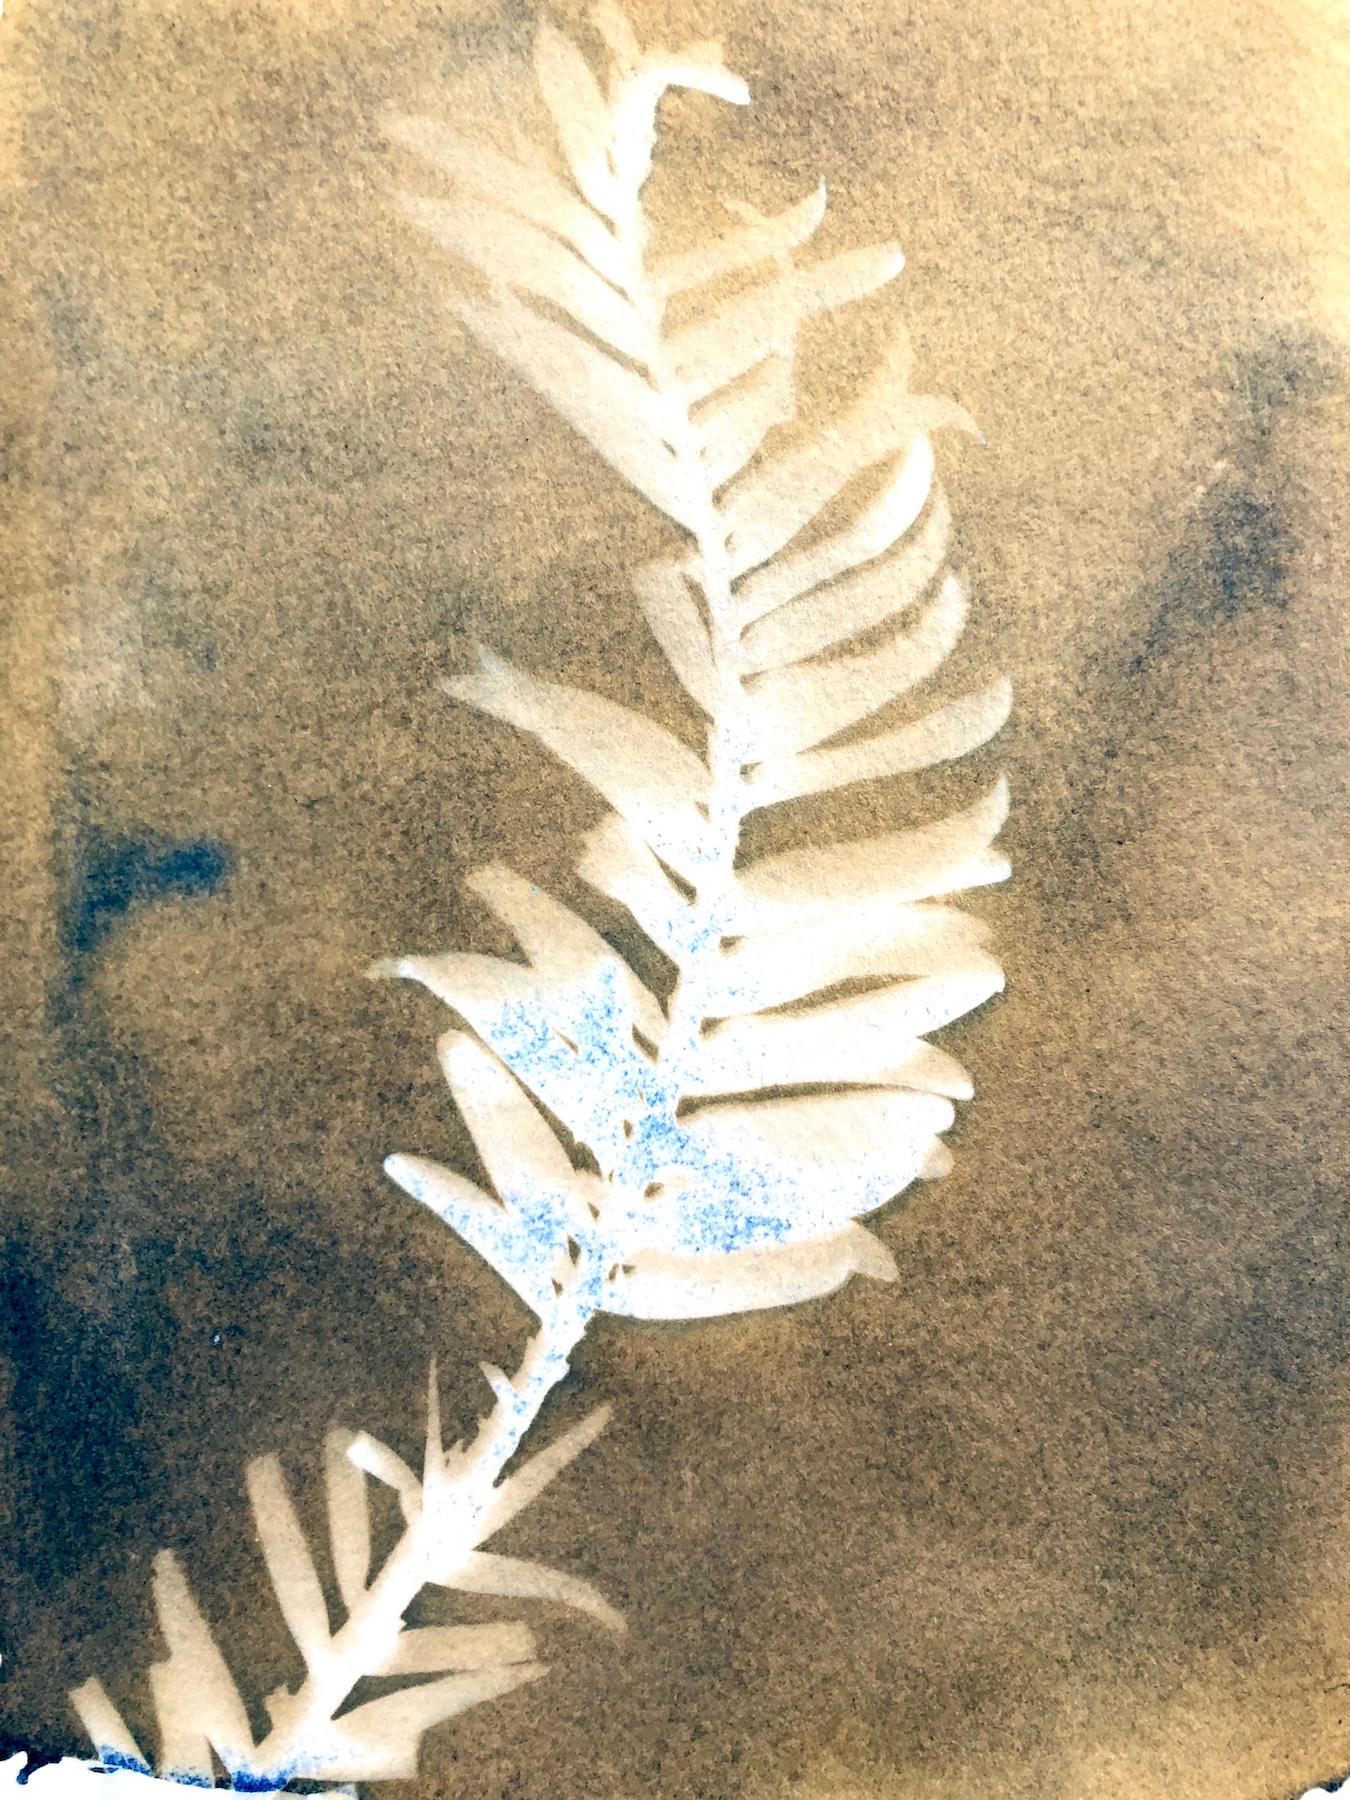 Marie Craig Abstract Photograph - "Wolemi Pine 2", contemporary, yellow, trees, forests, cyanotype, photograph